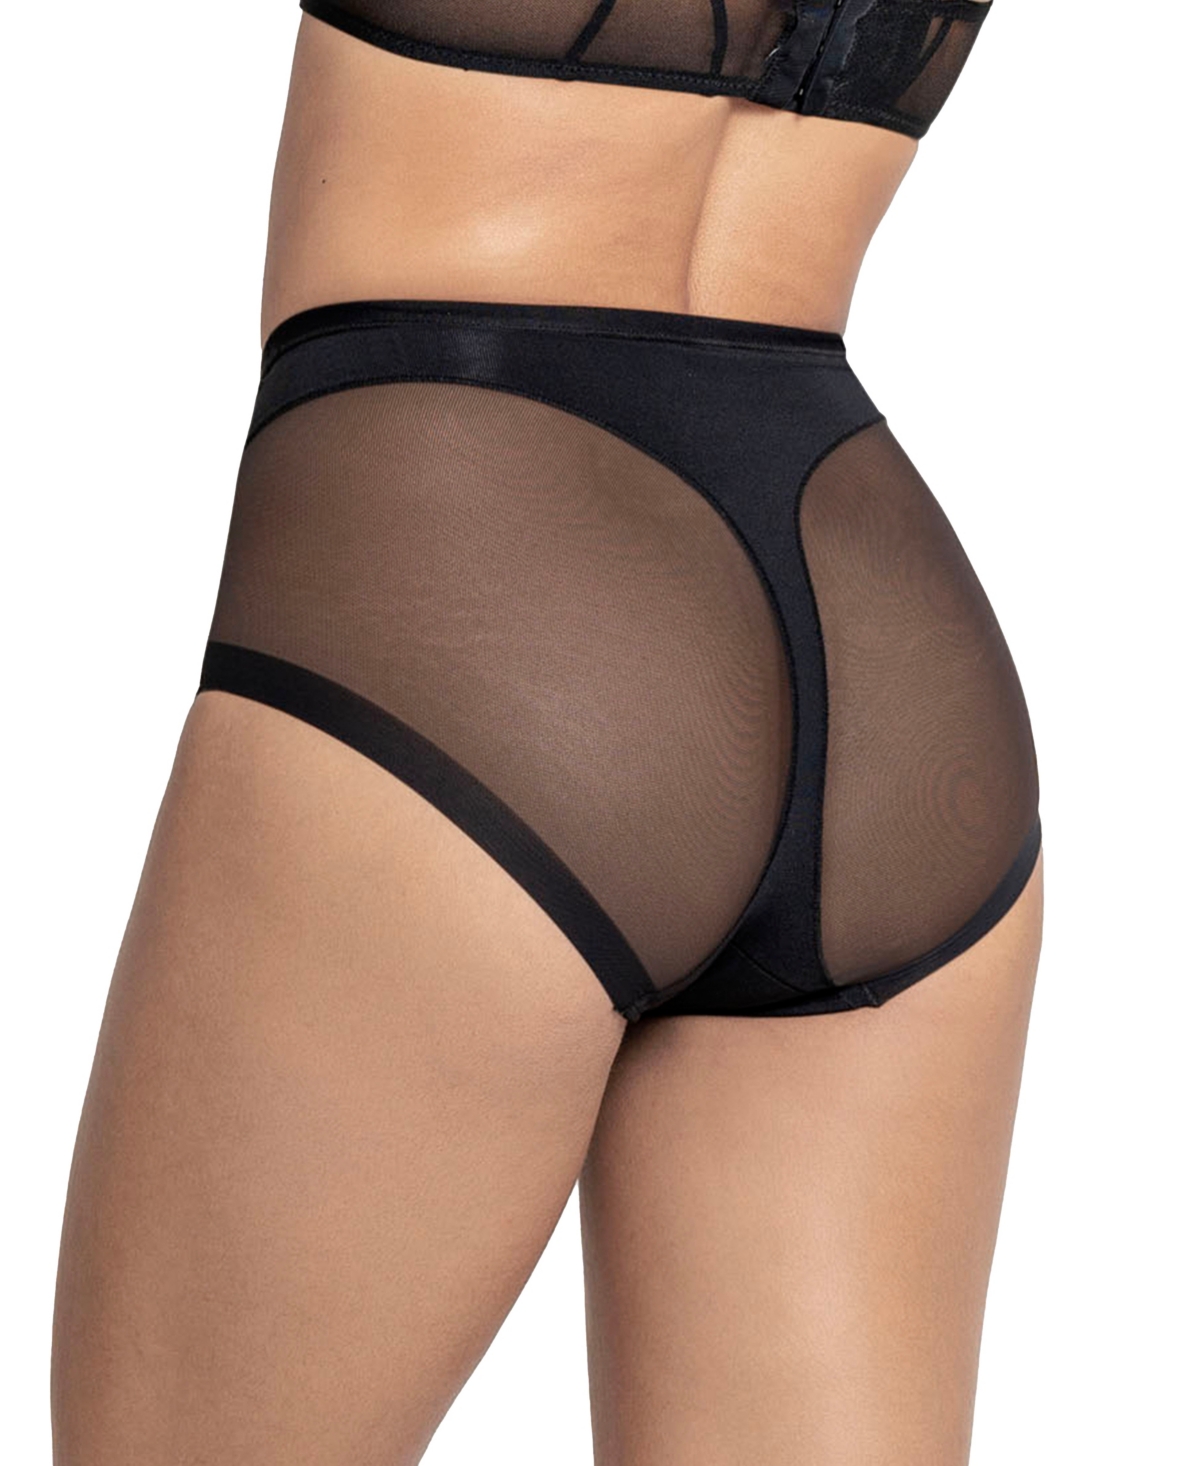 Women's Truly Undetectable Comfy Shaper Panty - Dark Brown